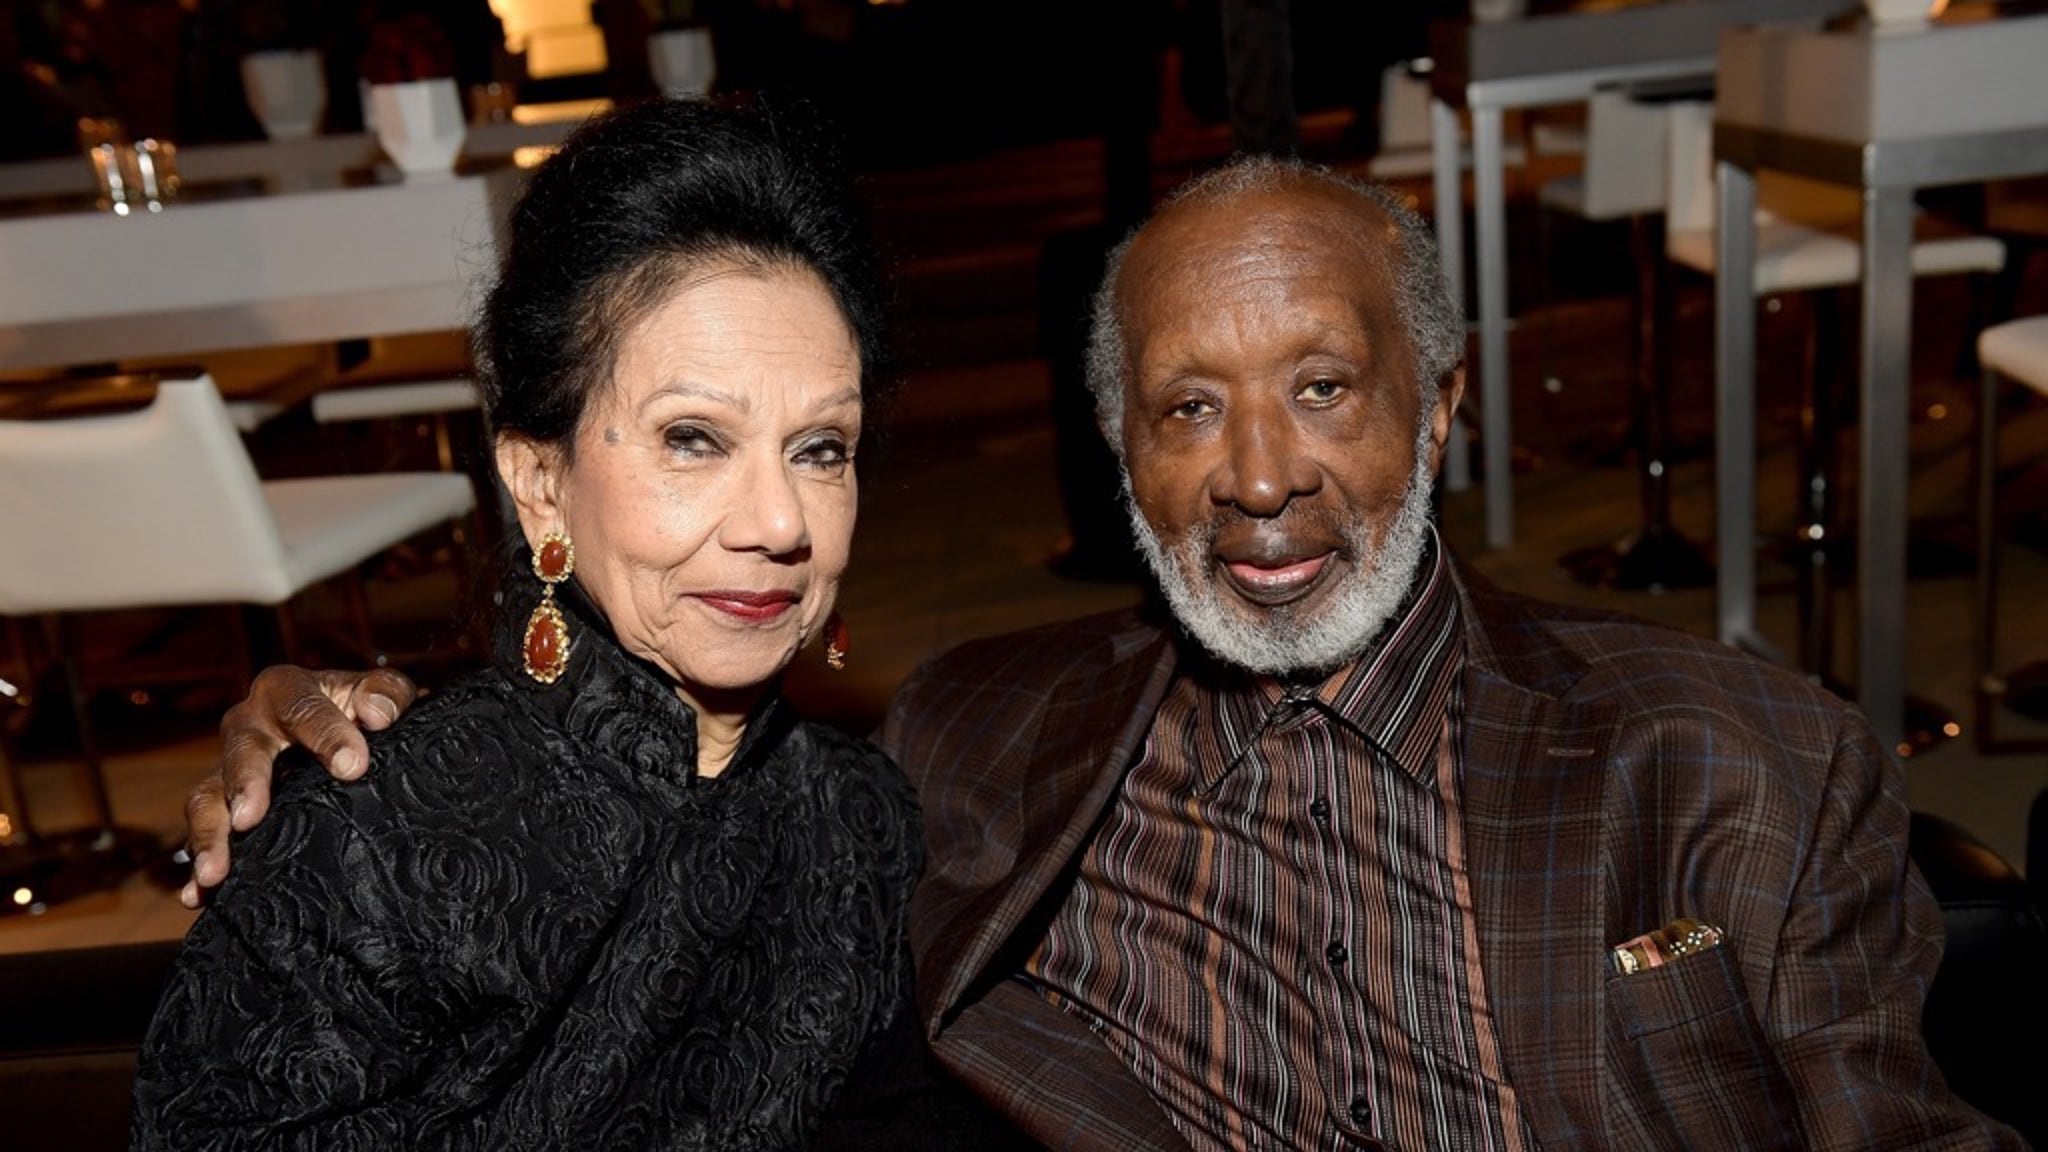 Songs Legend Clarence Avant’s Wife Jacqueline Shot and Killed in Home Invasion